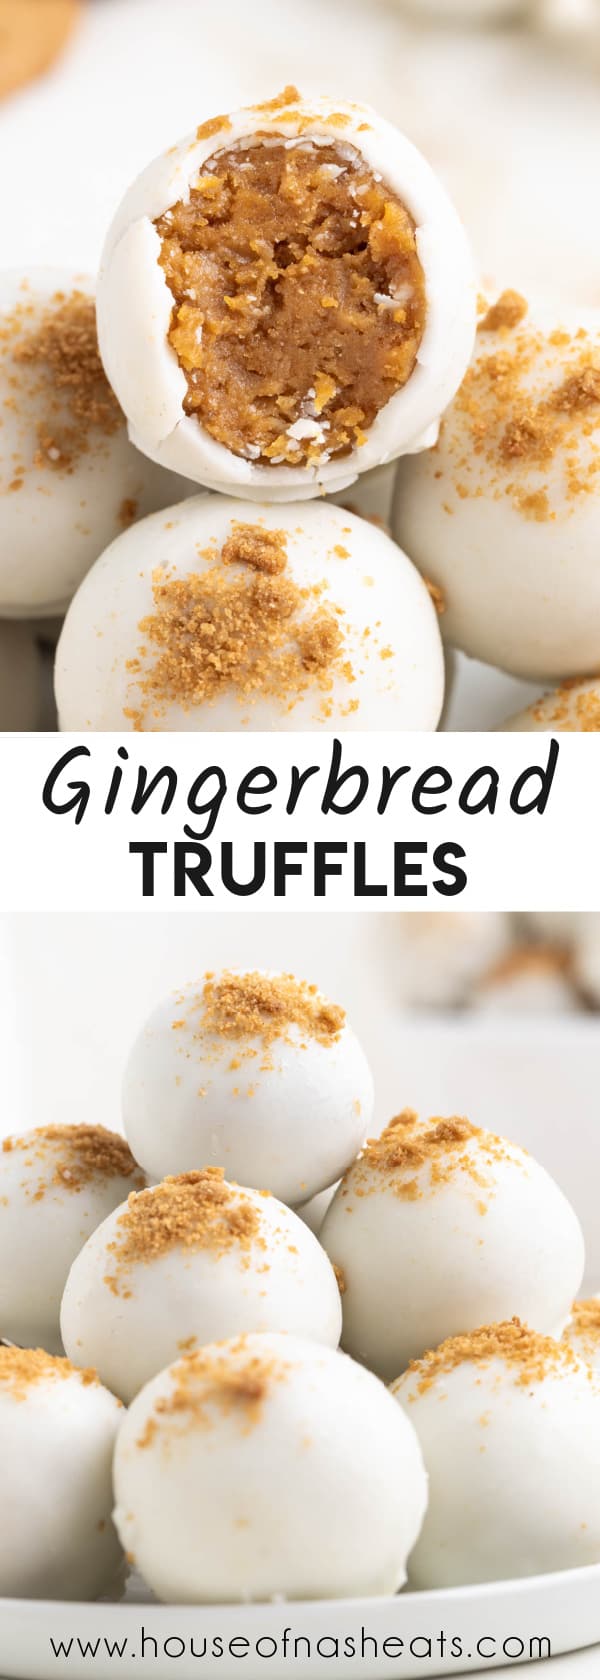 A collage of images of gingerbread truffles with text overlay.